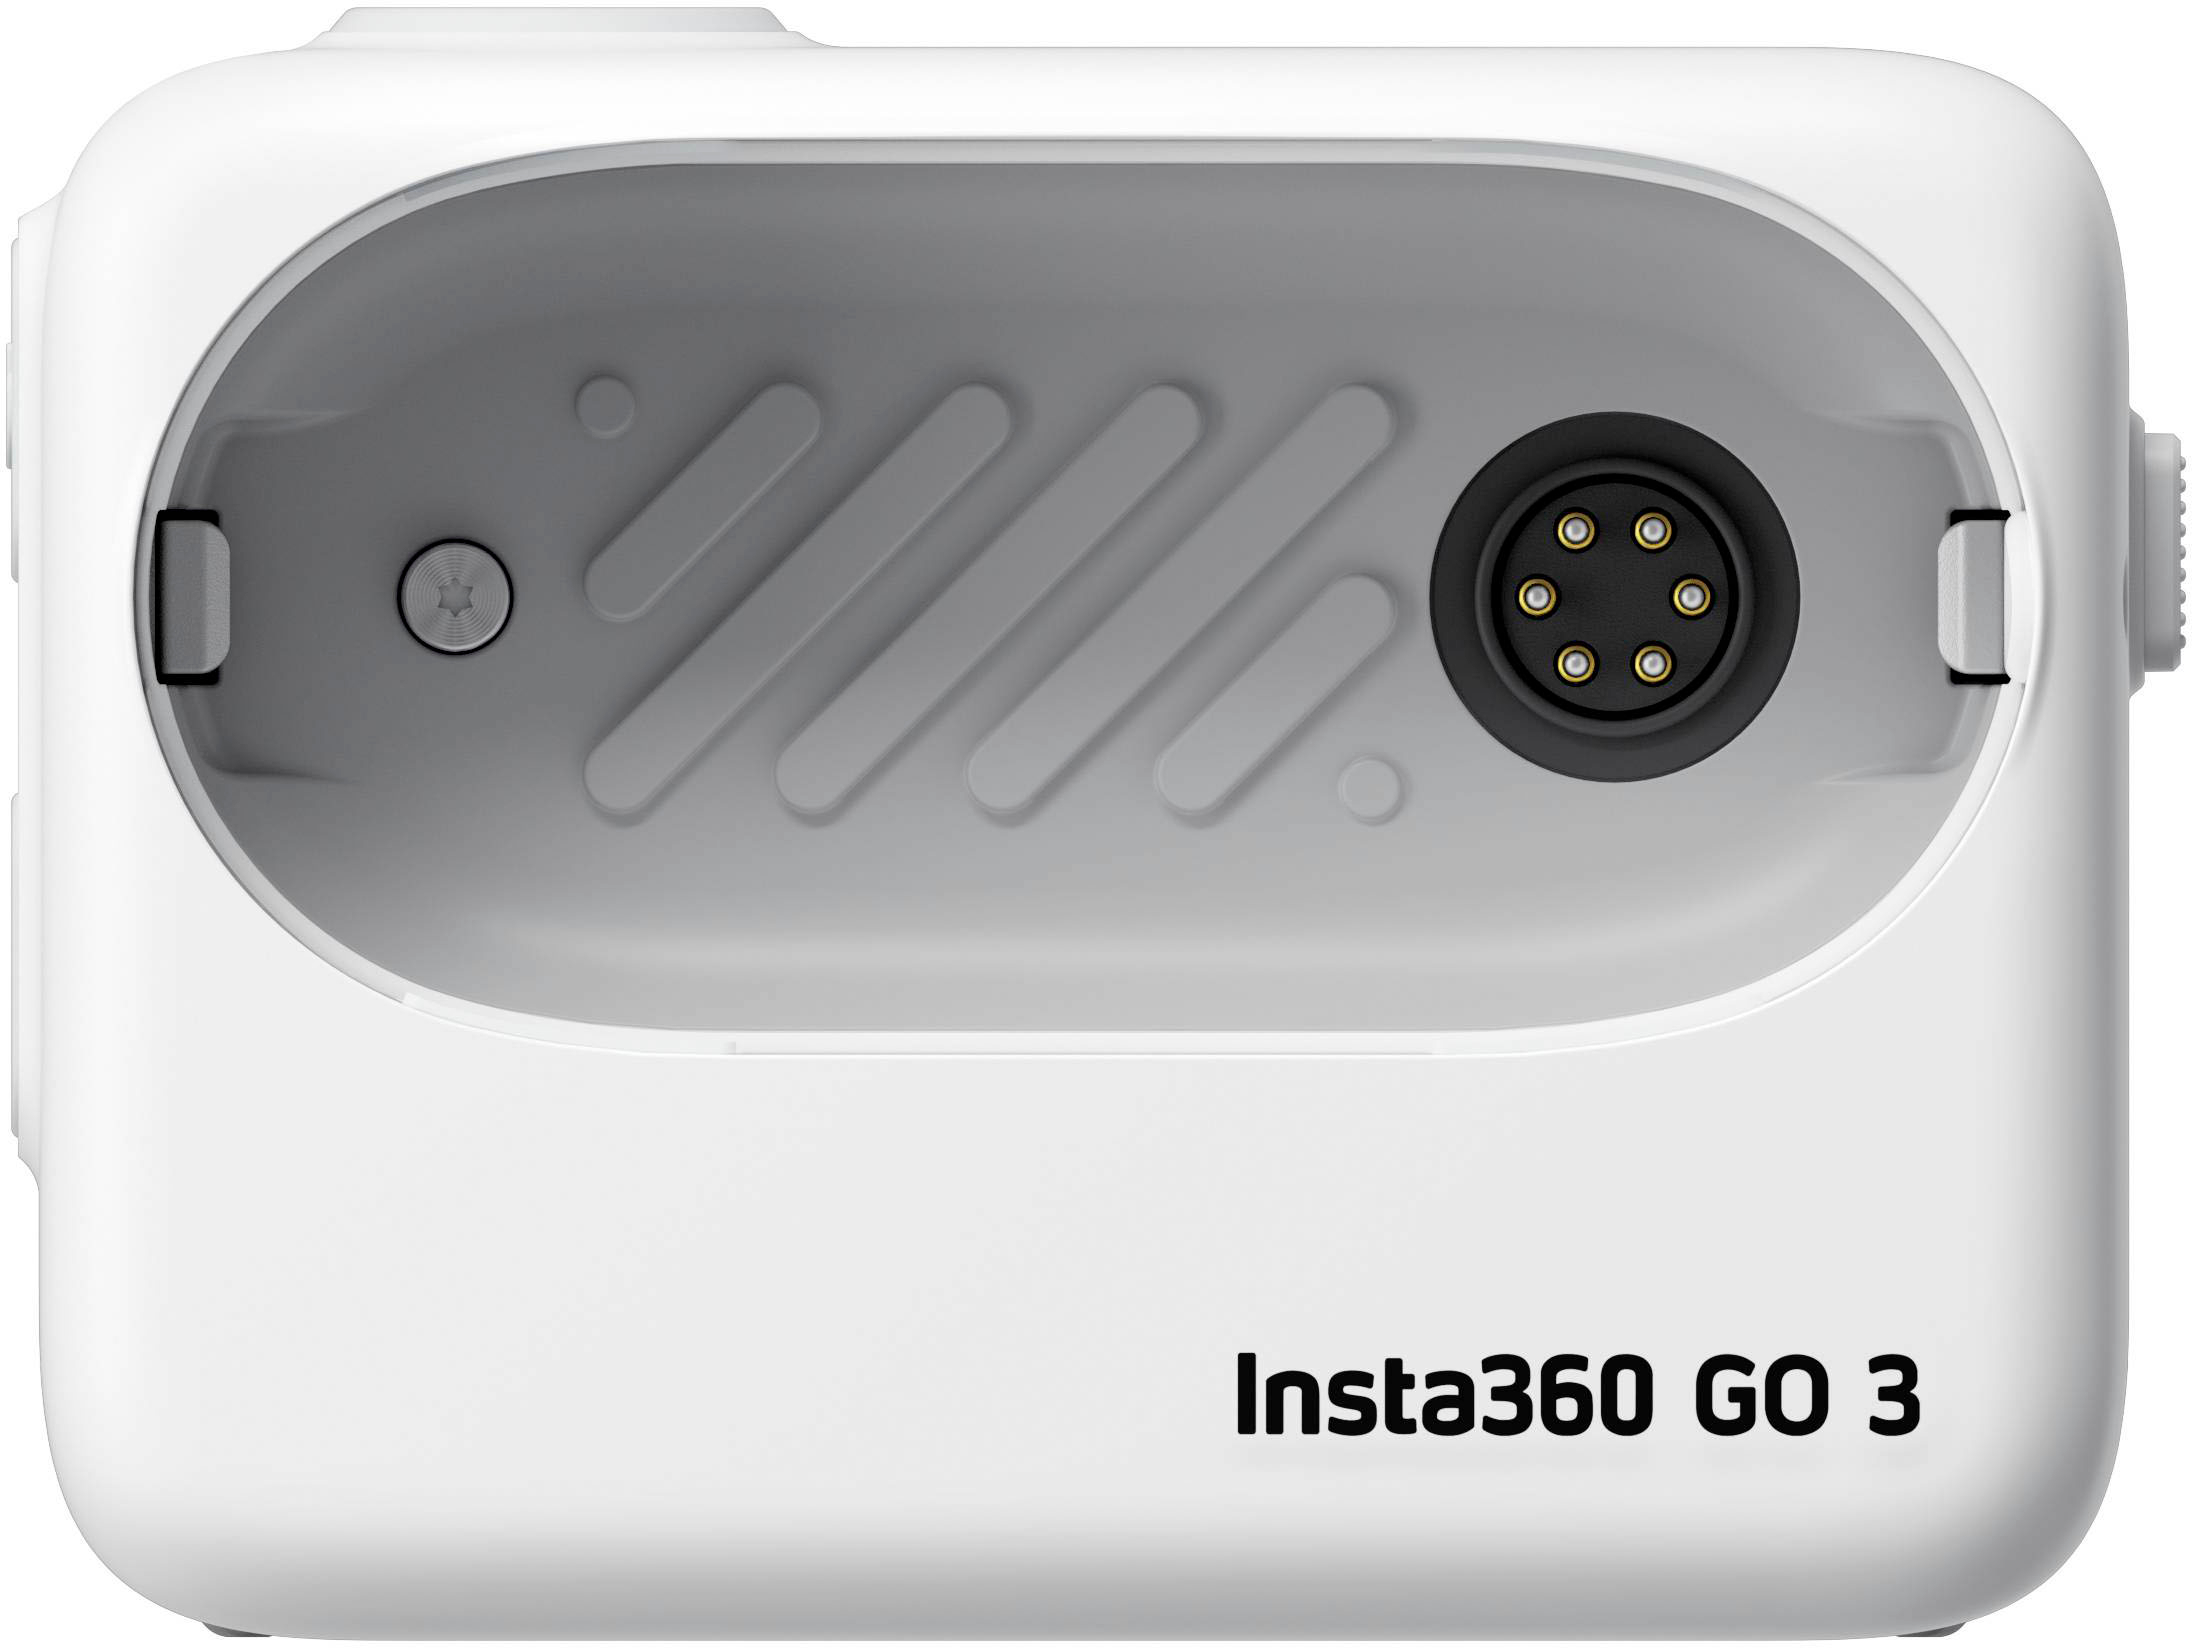 Insta360 GO 3 Action Camera: 13 things to know - Bike Shop Girl